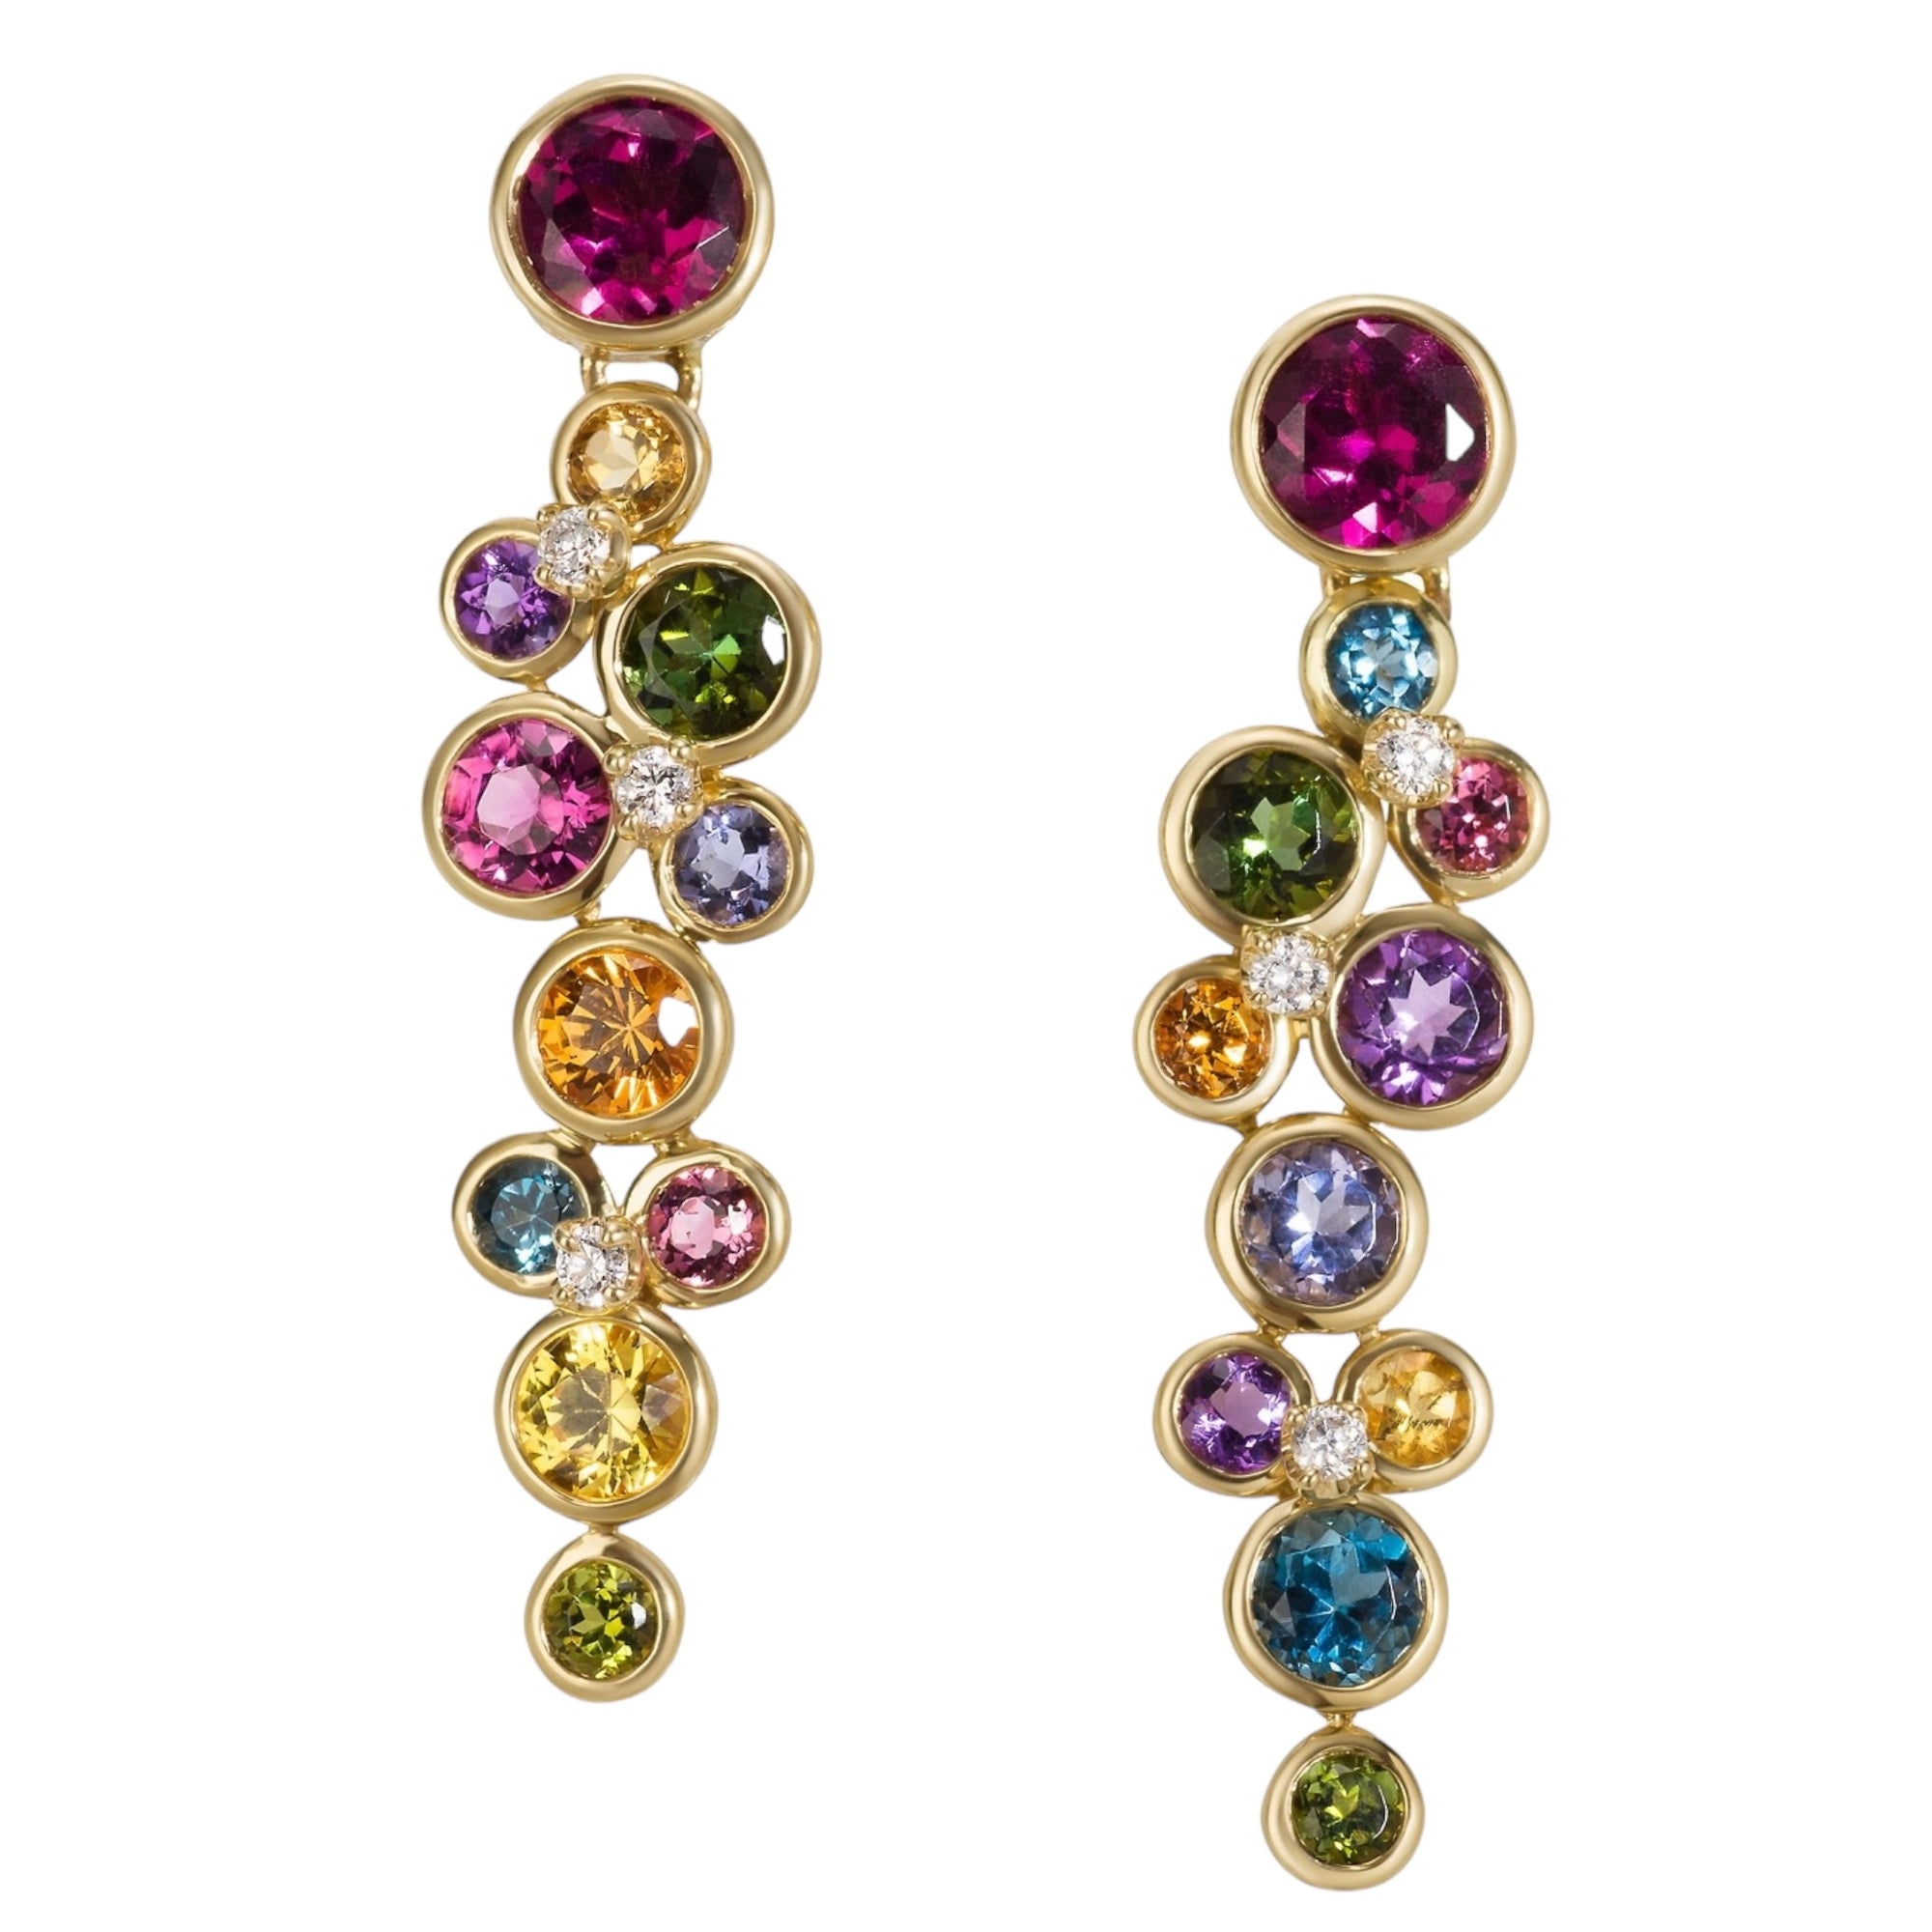  Multi-color Constellation Earrings by Martha Seely available at Talisman Collection Fine Jewelers in El Dorado Hills, CA and online. Stats: Exquisite drop earrings adorned with a total of 2.27 carats of vibrant multi-colored gemstones and embellished with scattered diamonds totaling 0.12 cts. The gemstones are delicately bezel-set in 14k gold, adding a touch of elegance to their playful design as they sway and shimmy with a hint of whimsy. Measuring 1.5" in length. 